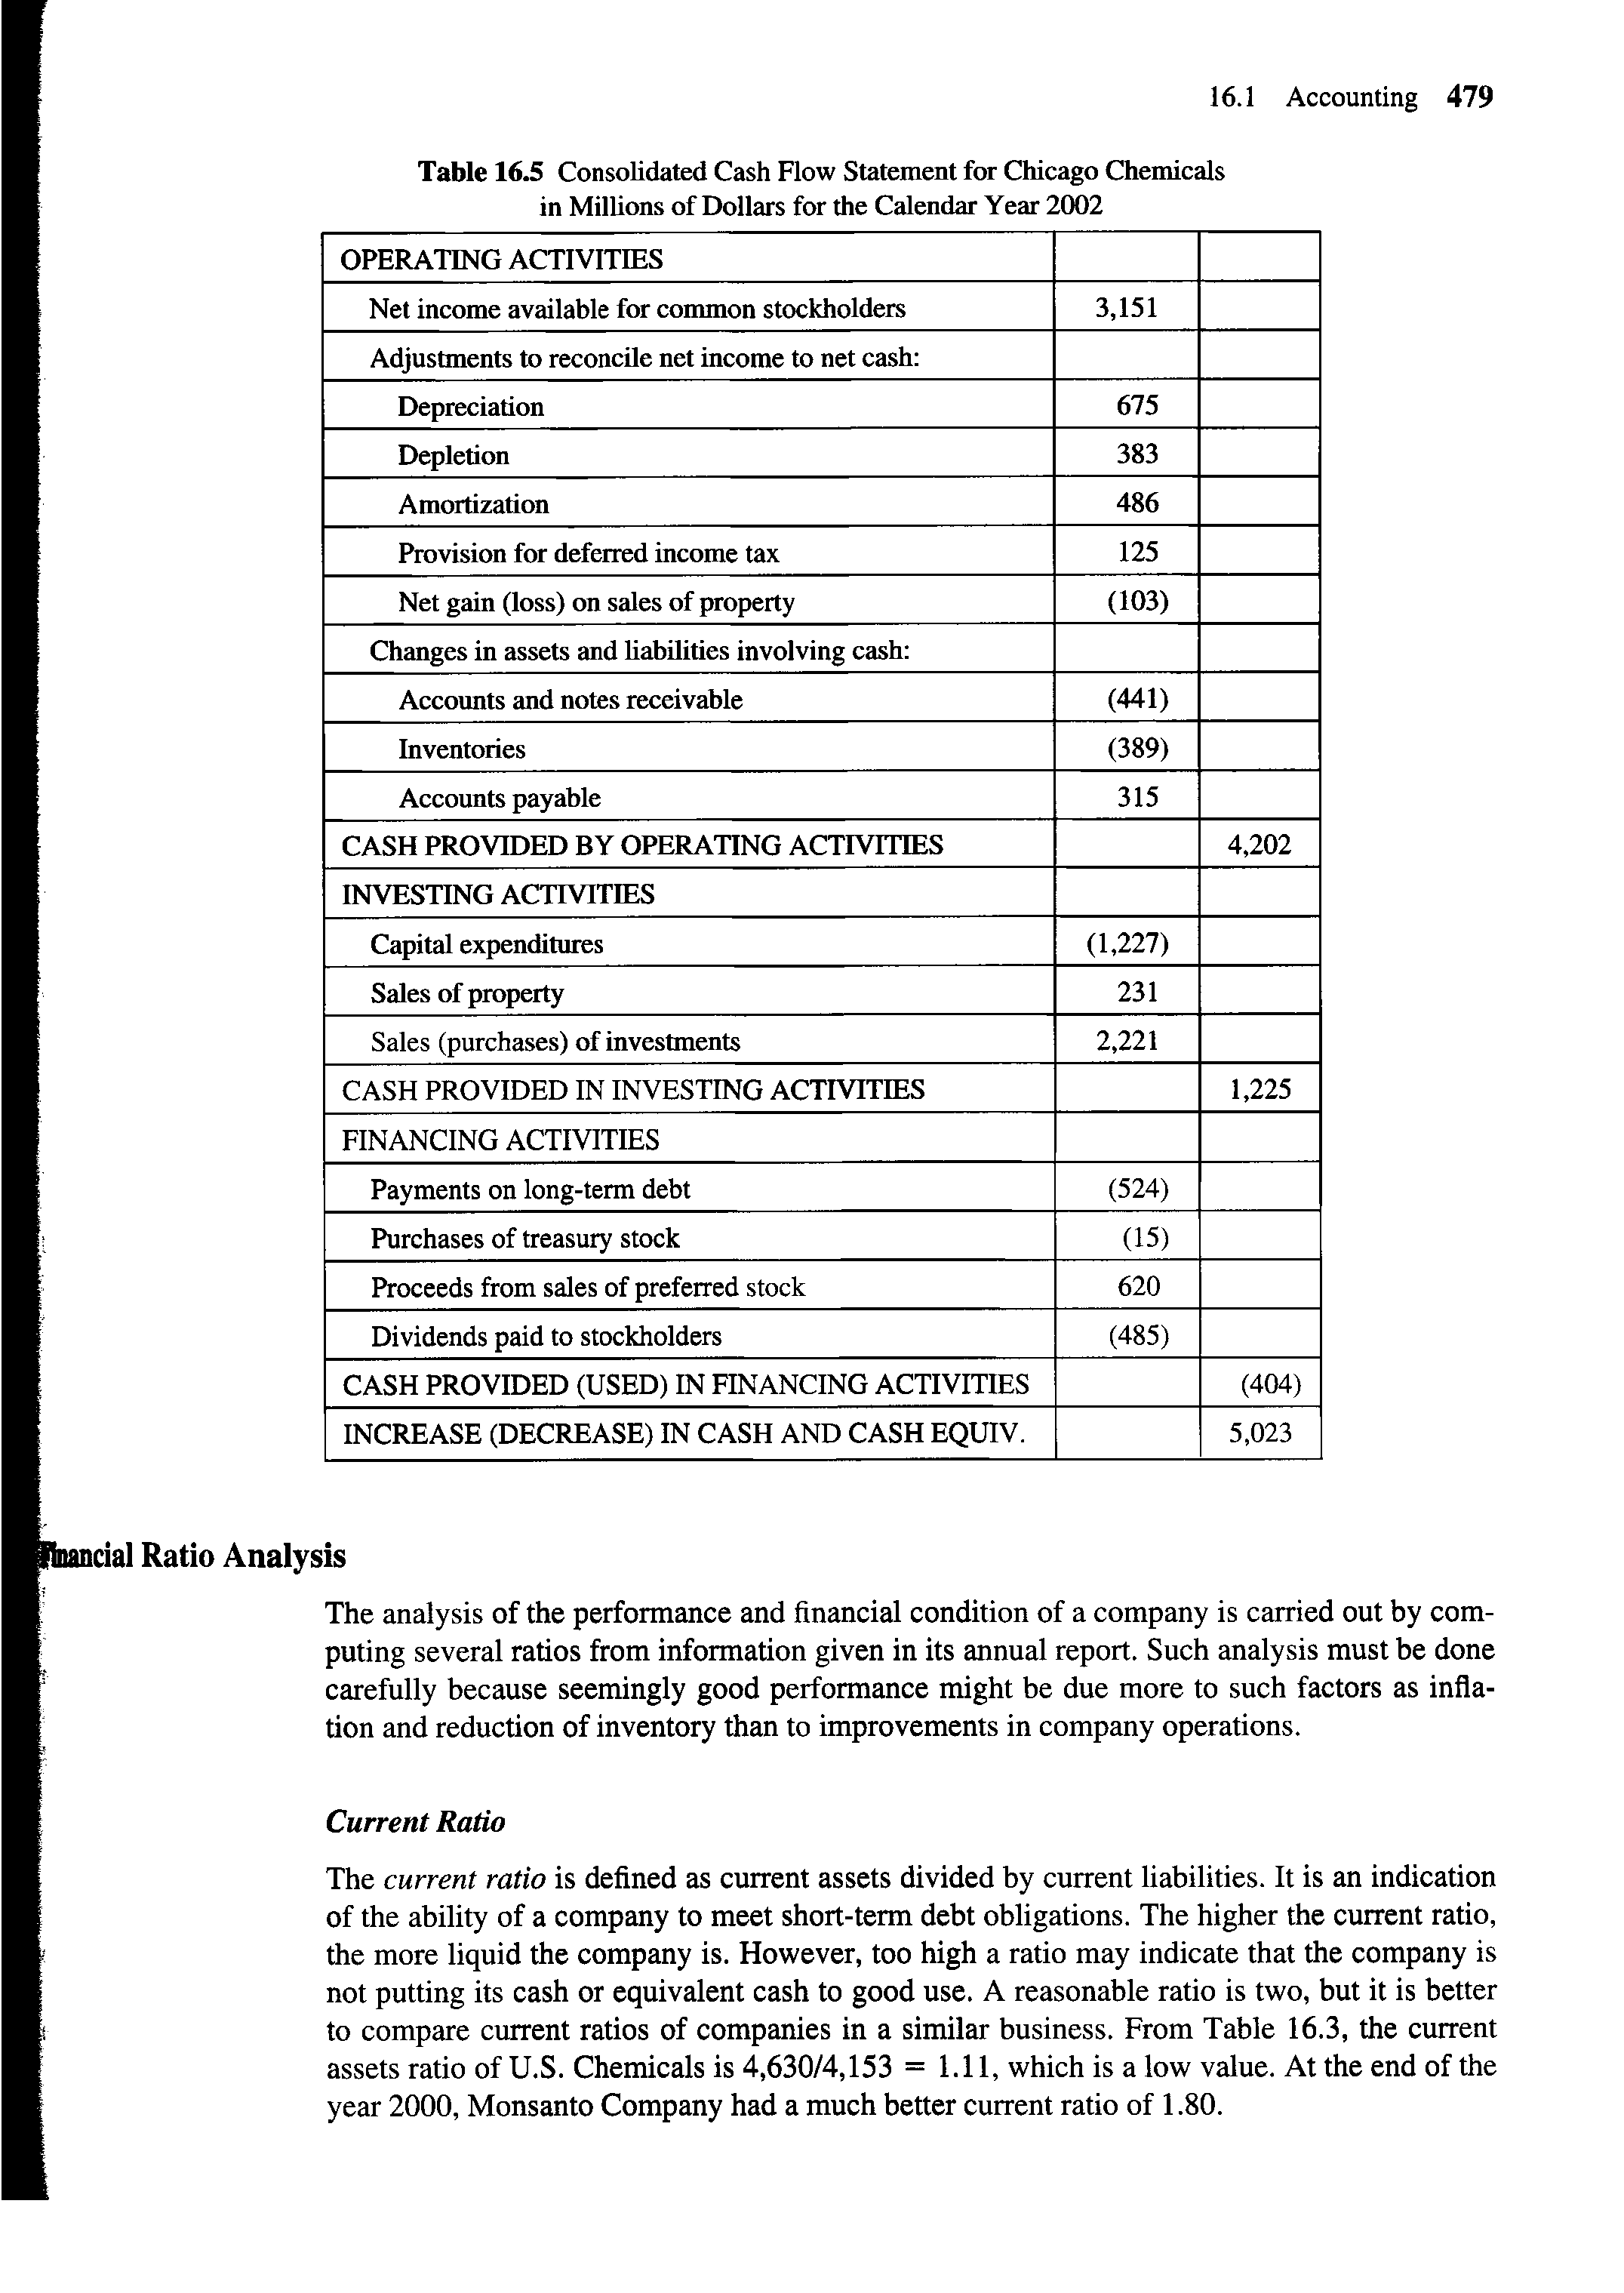 Table 16.5 Consolidated Cash Flow Statement for Chicago Chemicals in Millions of Dollars for the Calendar Year 2002...